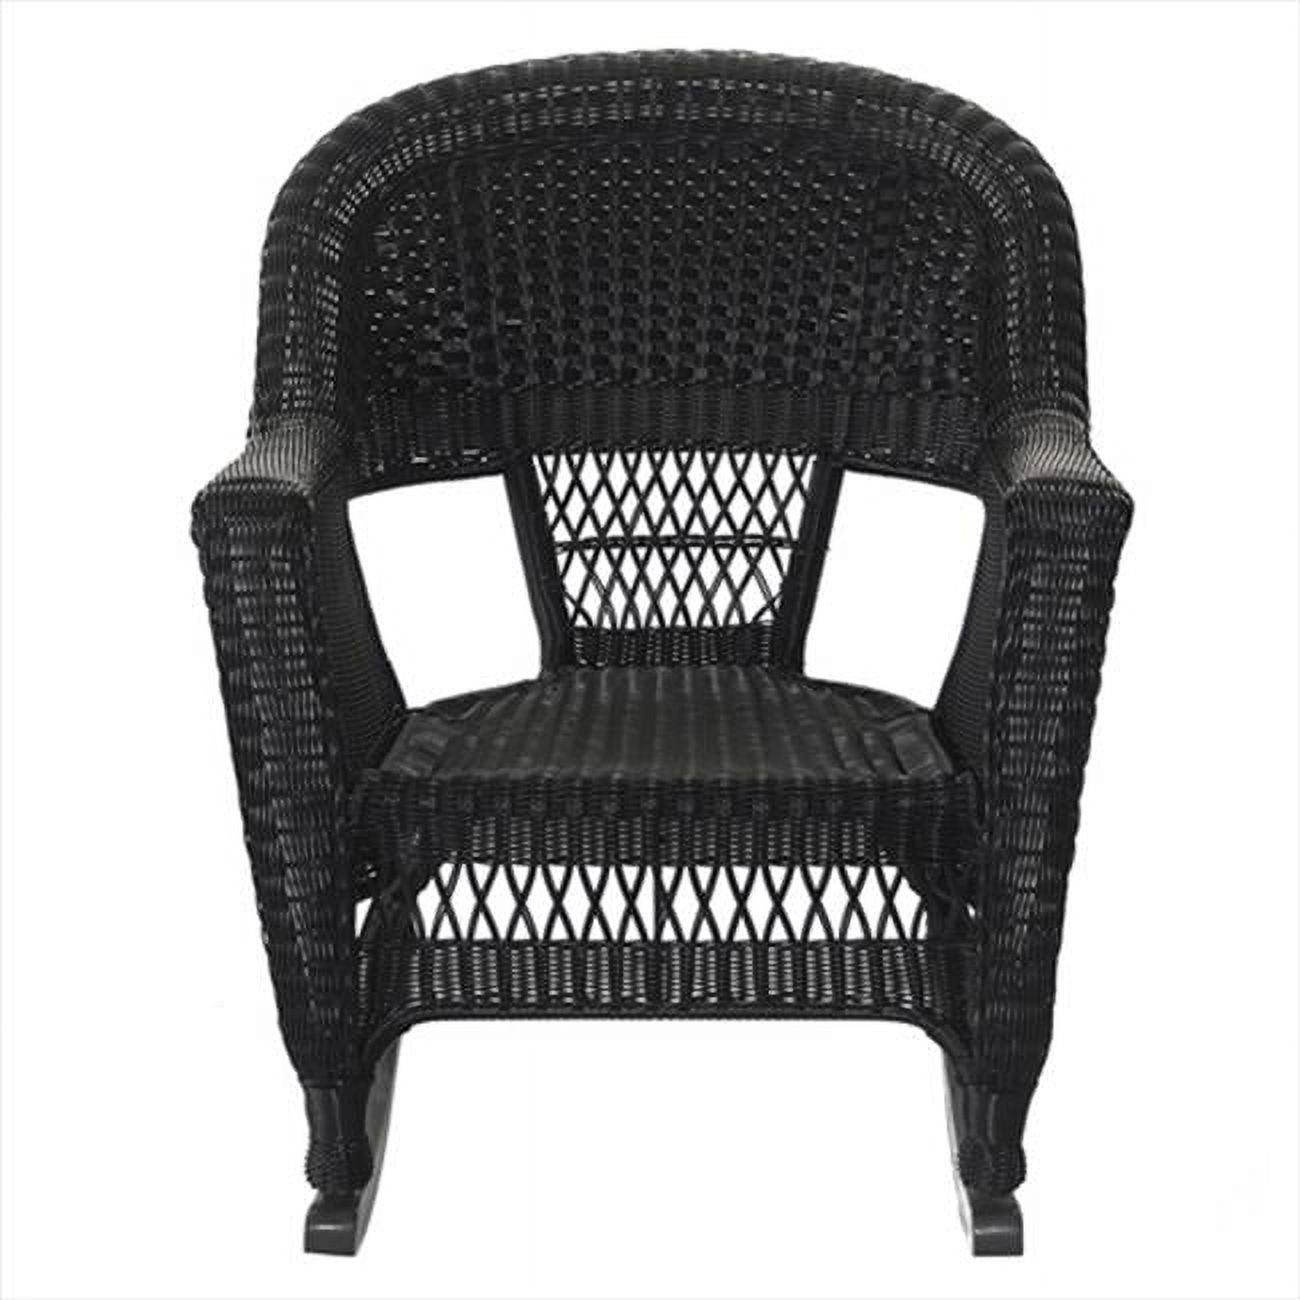 Jeco W00207R-D-2-RCES029 3 Piece Black Rocker Wicker Chair Set With Green Cushion - image 1 of 1